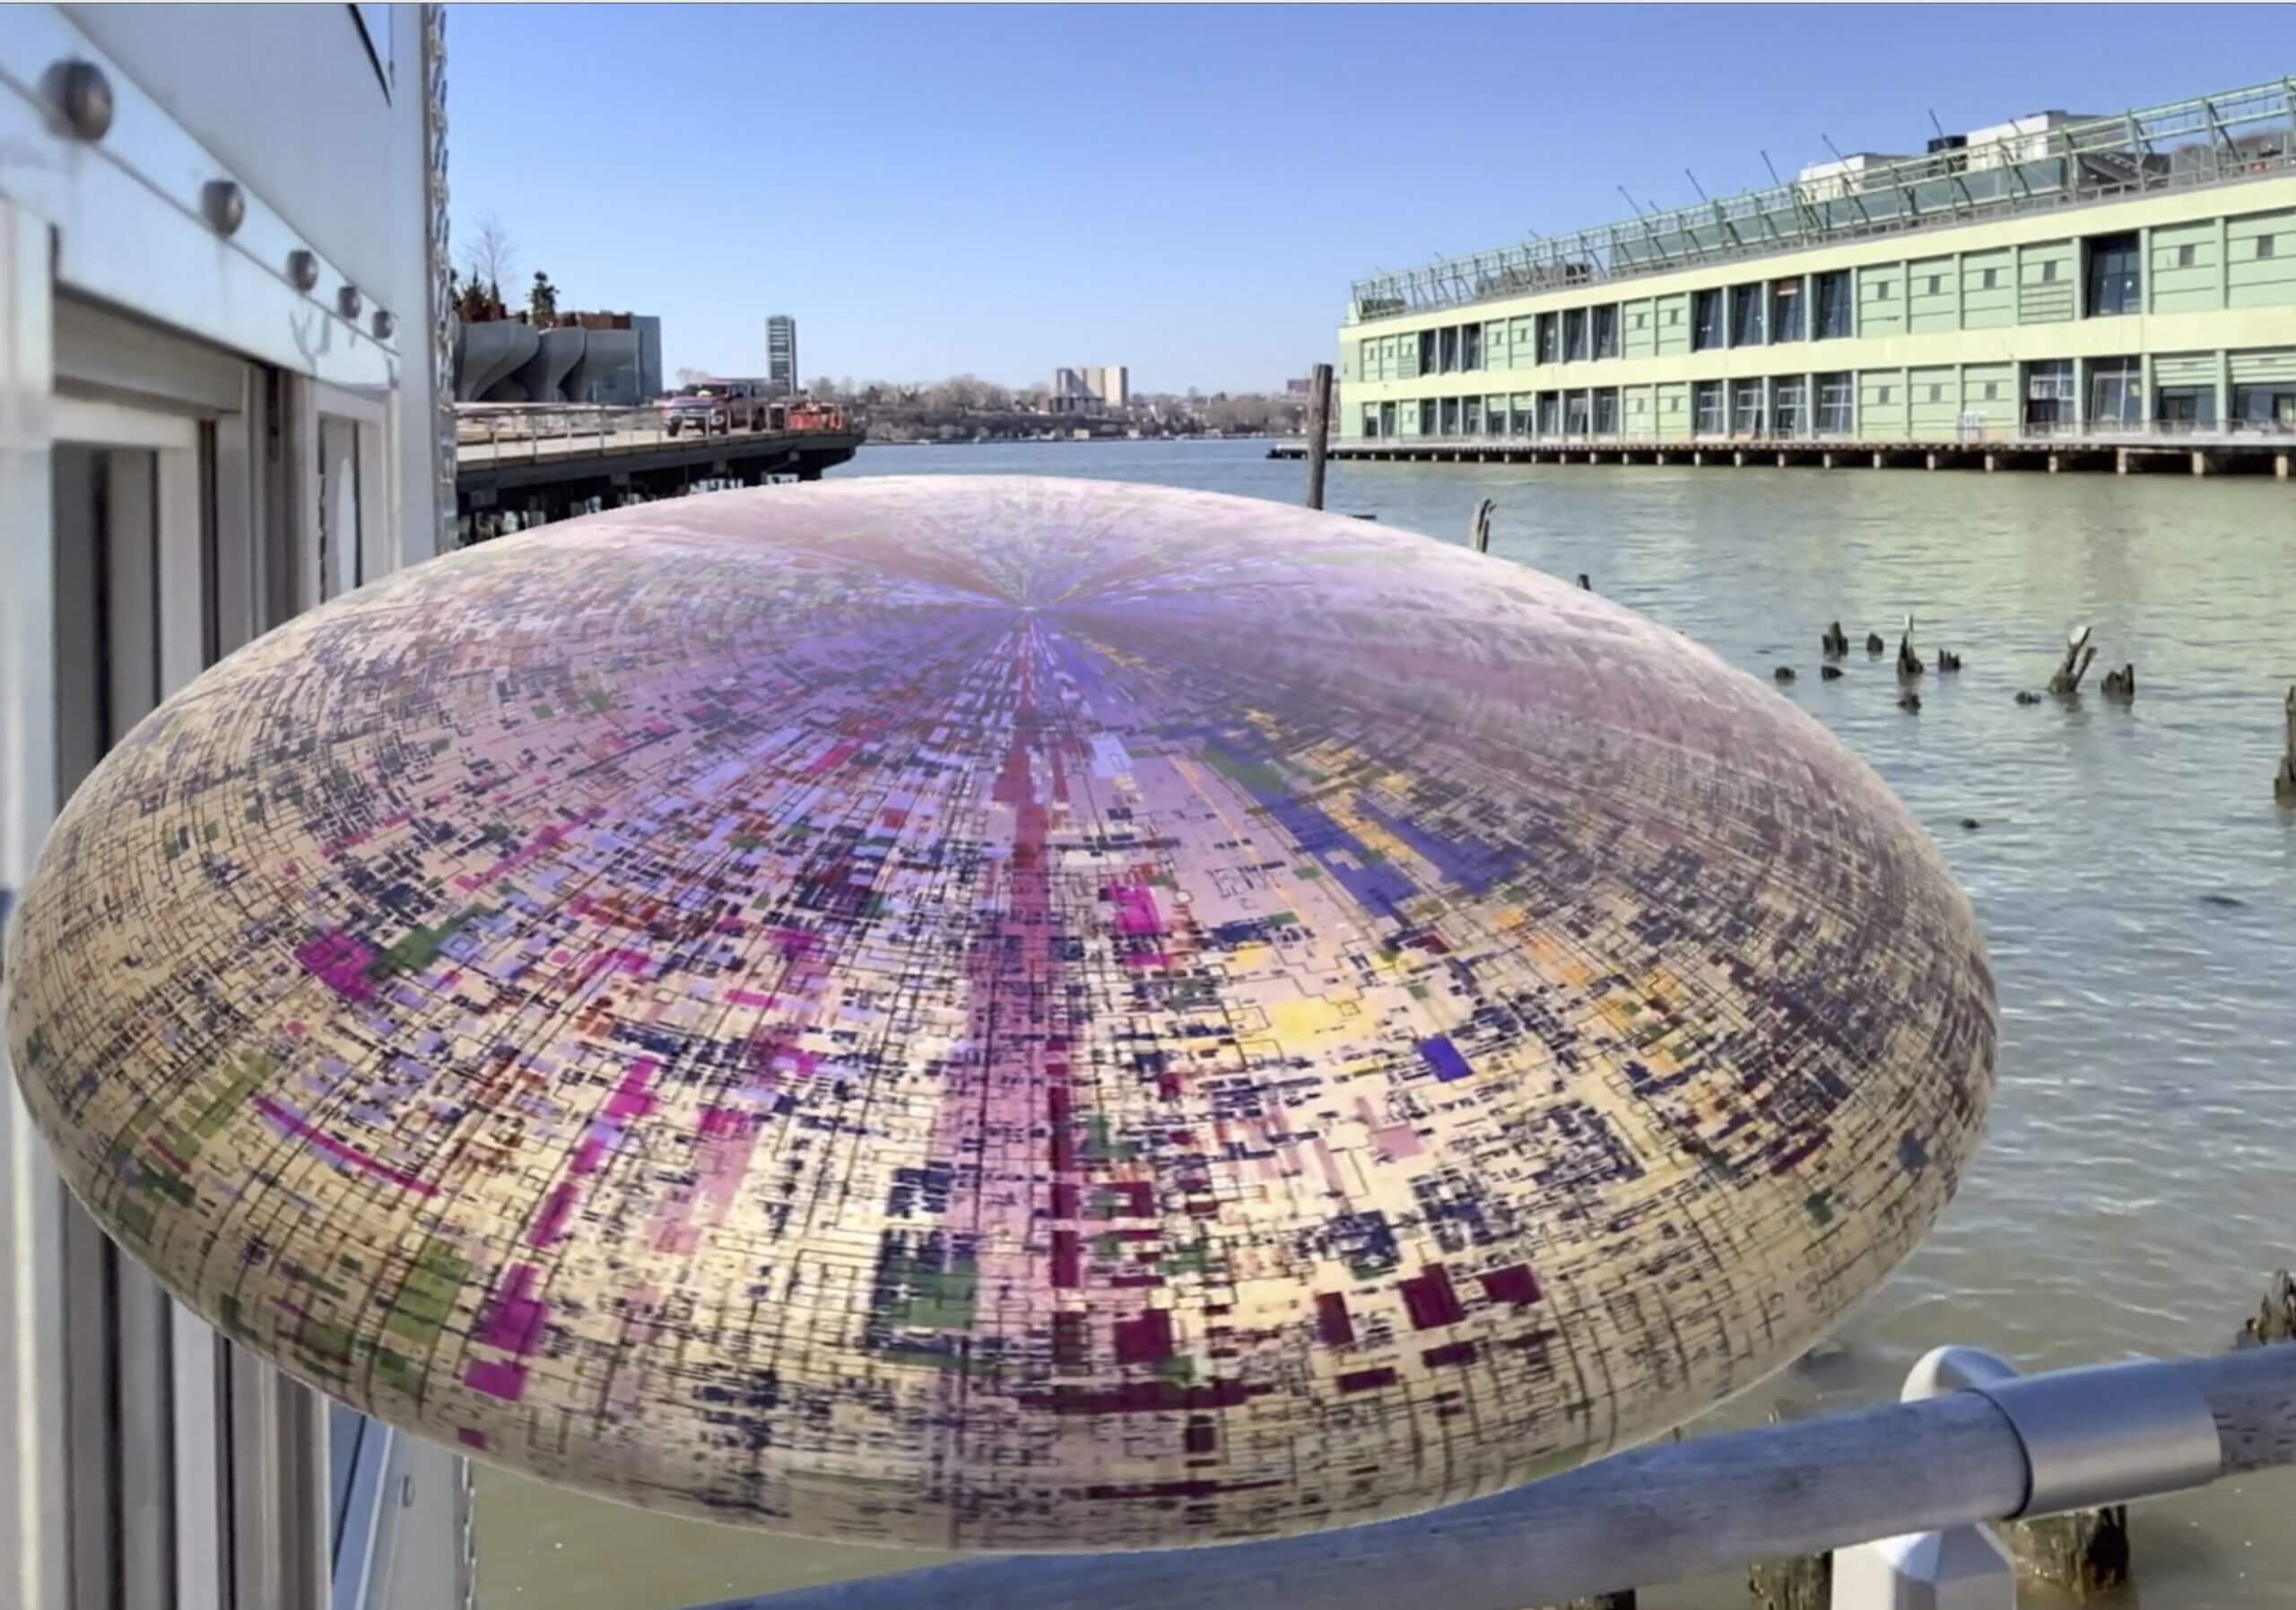 Shuli Sade Brings Augmented Reality to NYC’s Summer 2021 Art Celebration on the Hudson